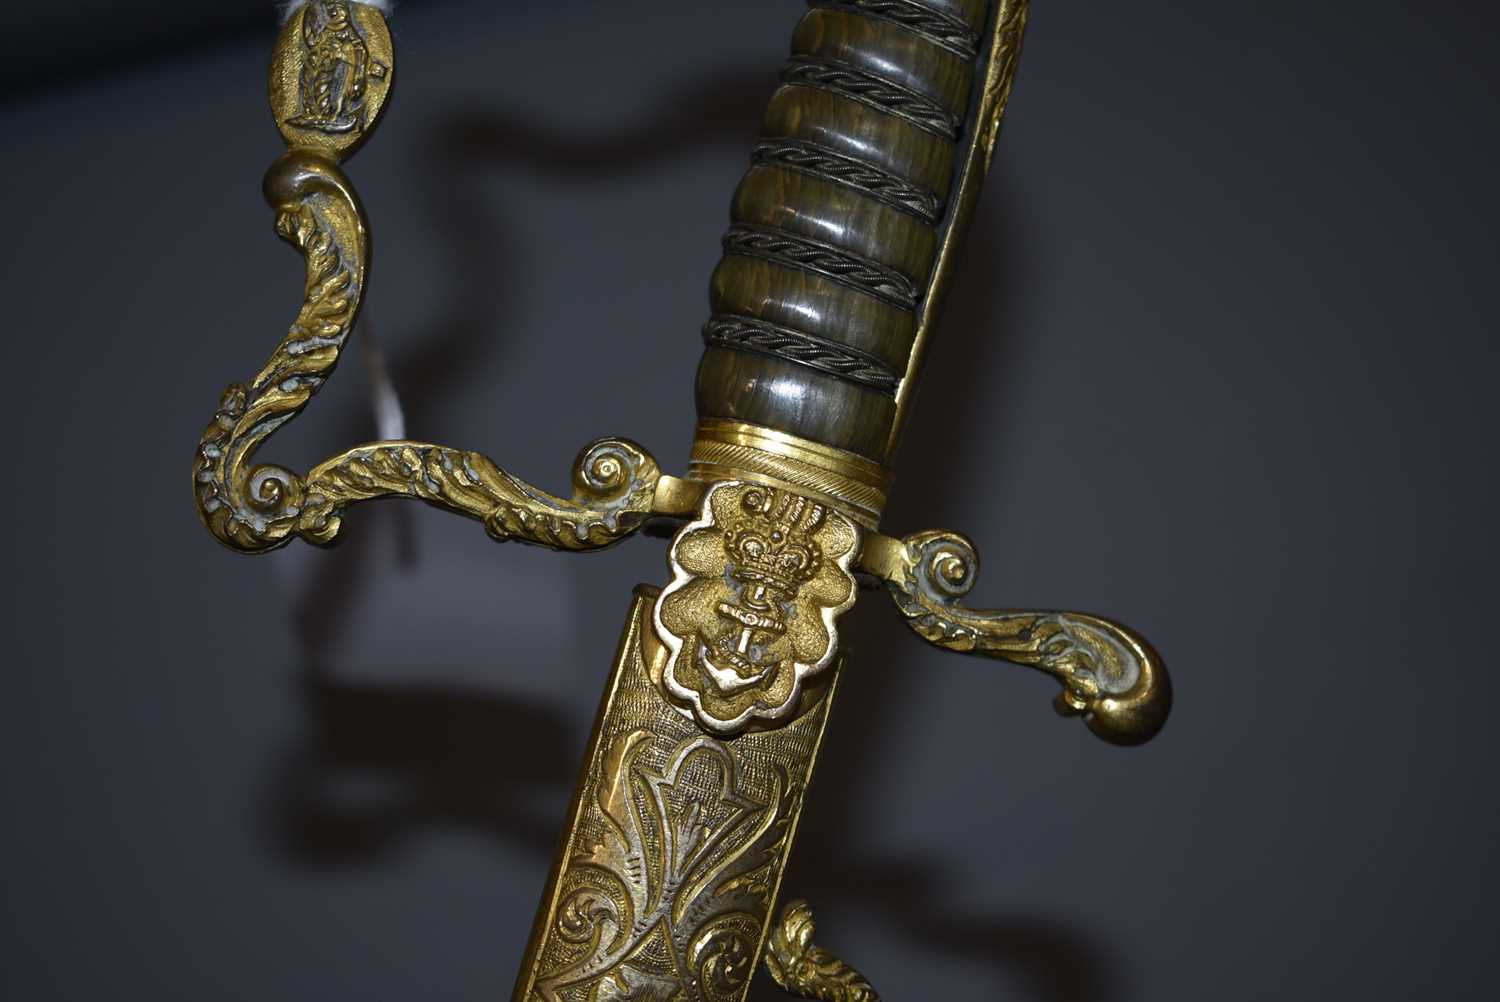 AN ORNATELY MOUNTED GEORGIAN NAVAL OFFICER'S SWORD, - Image 8 of 18